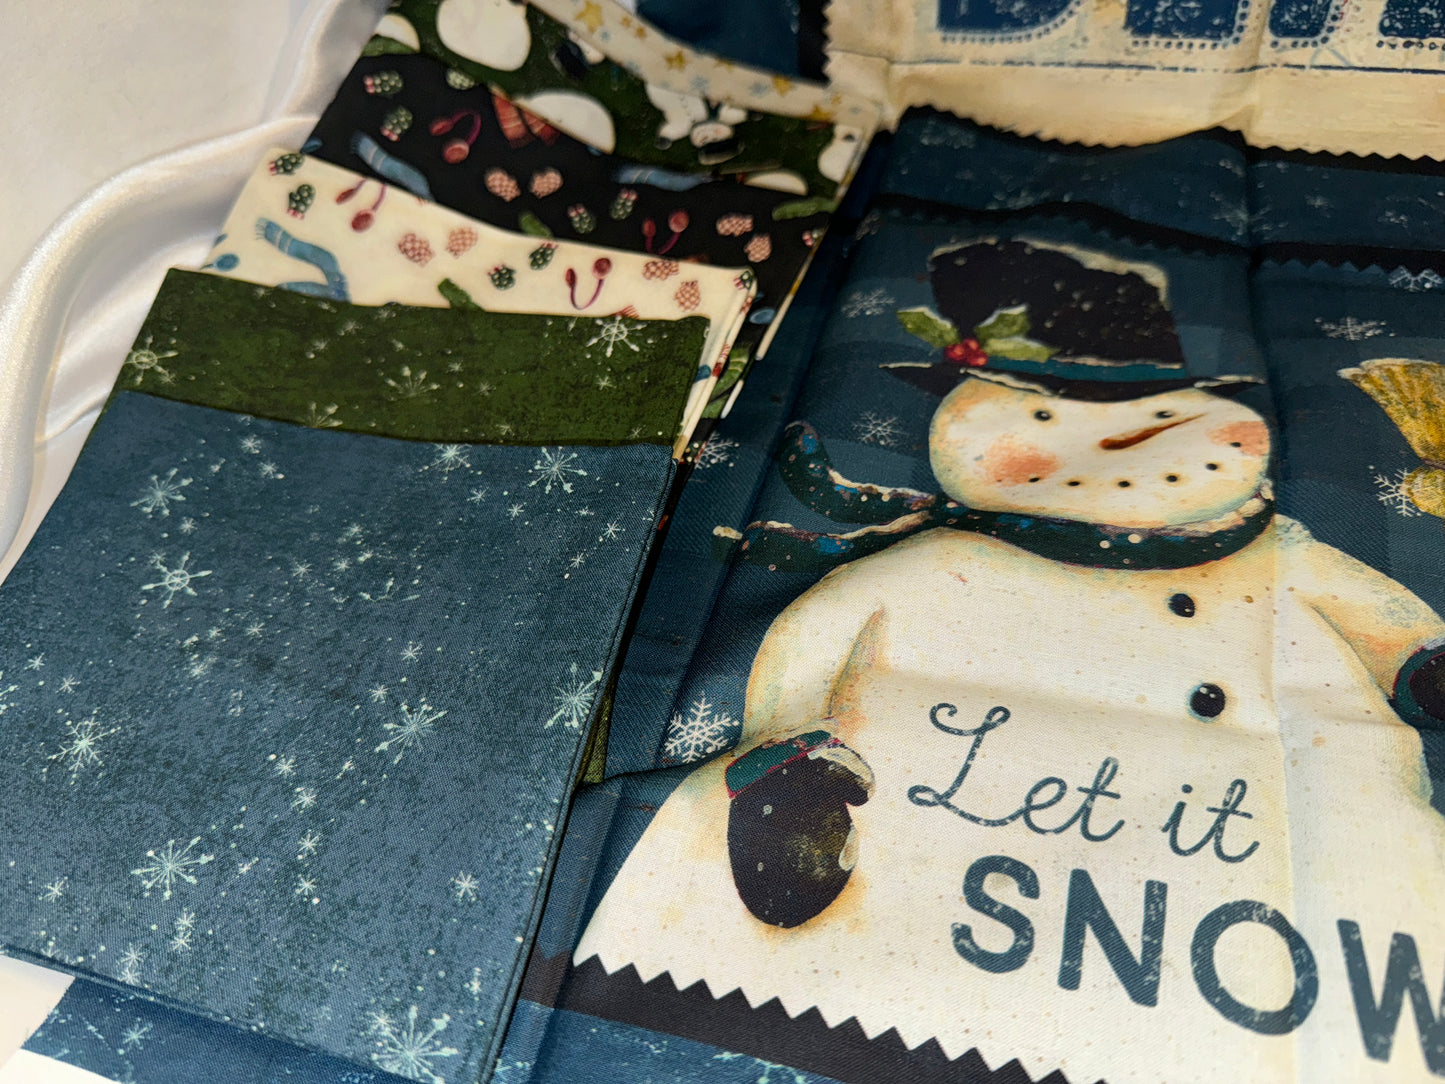 Snovalley by Clothworks FQ PRECUT BUNDLE 18 pieces with Snow valley Panel "If Kisses were snowflakes I'd Send you a Blizzard!"